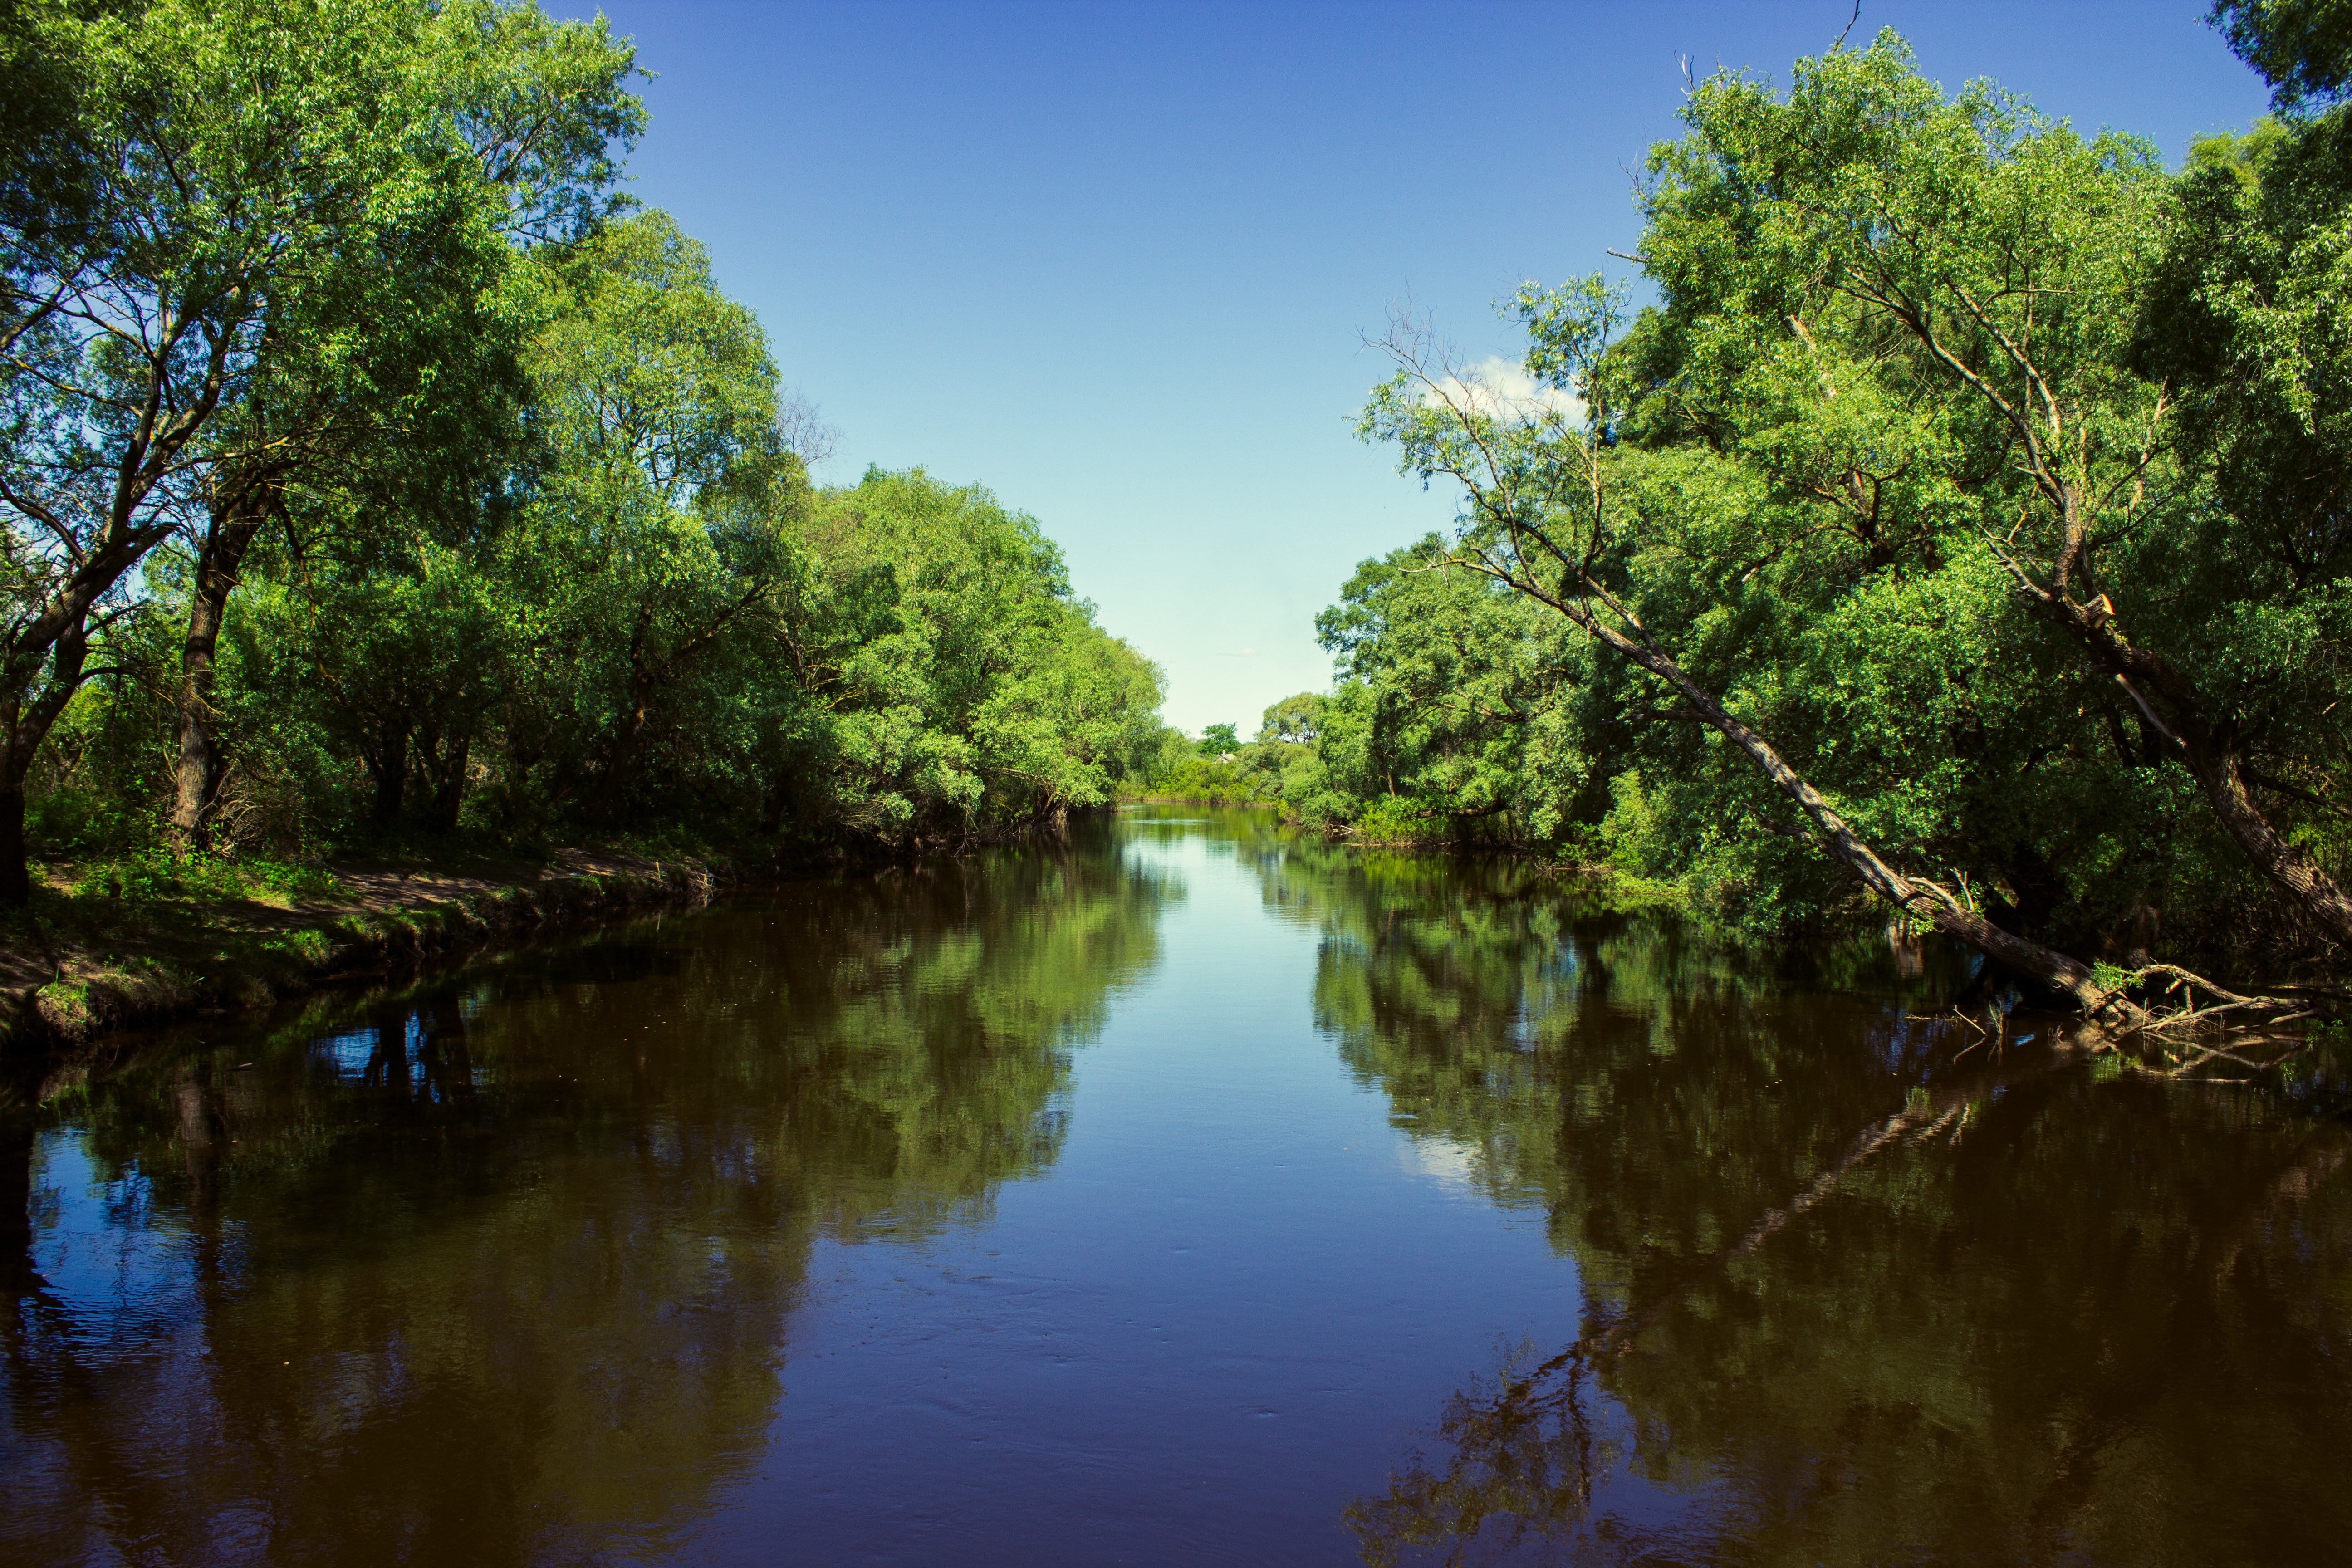 A wide river in a forested area